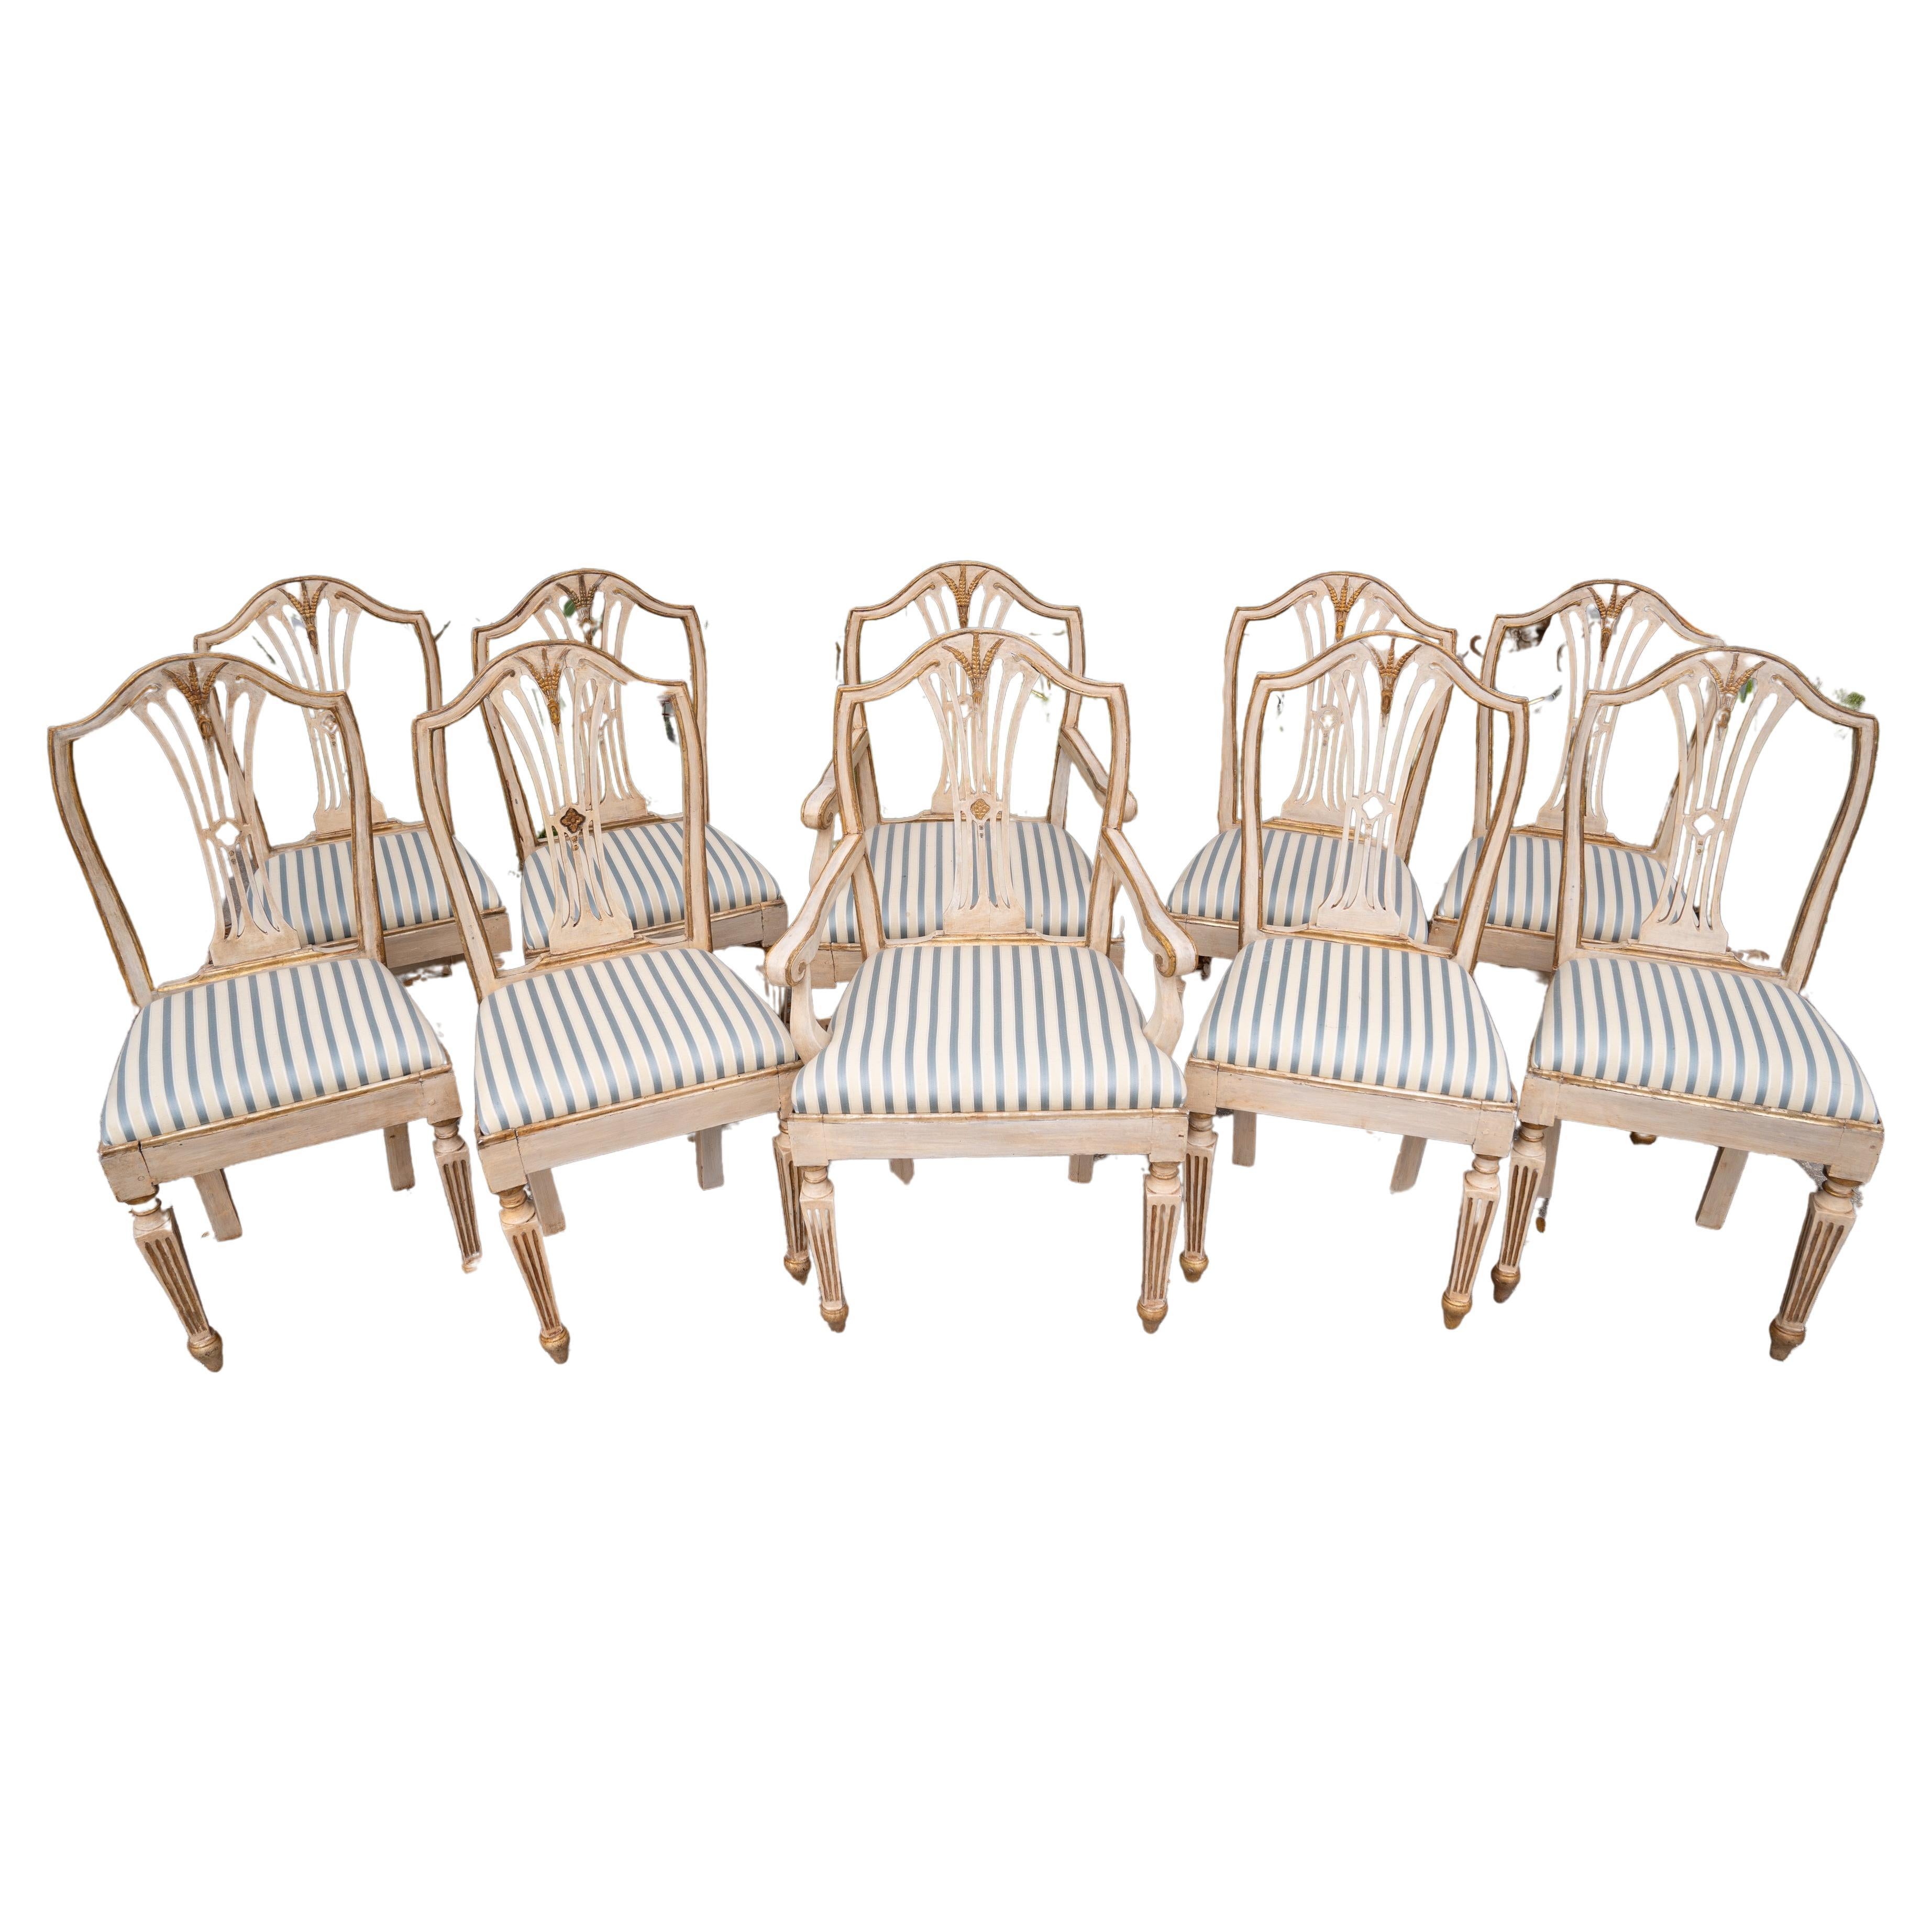 Set of 10 Louis XVI Style Painted and Gilded Chairs